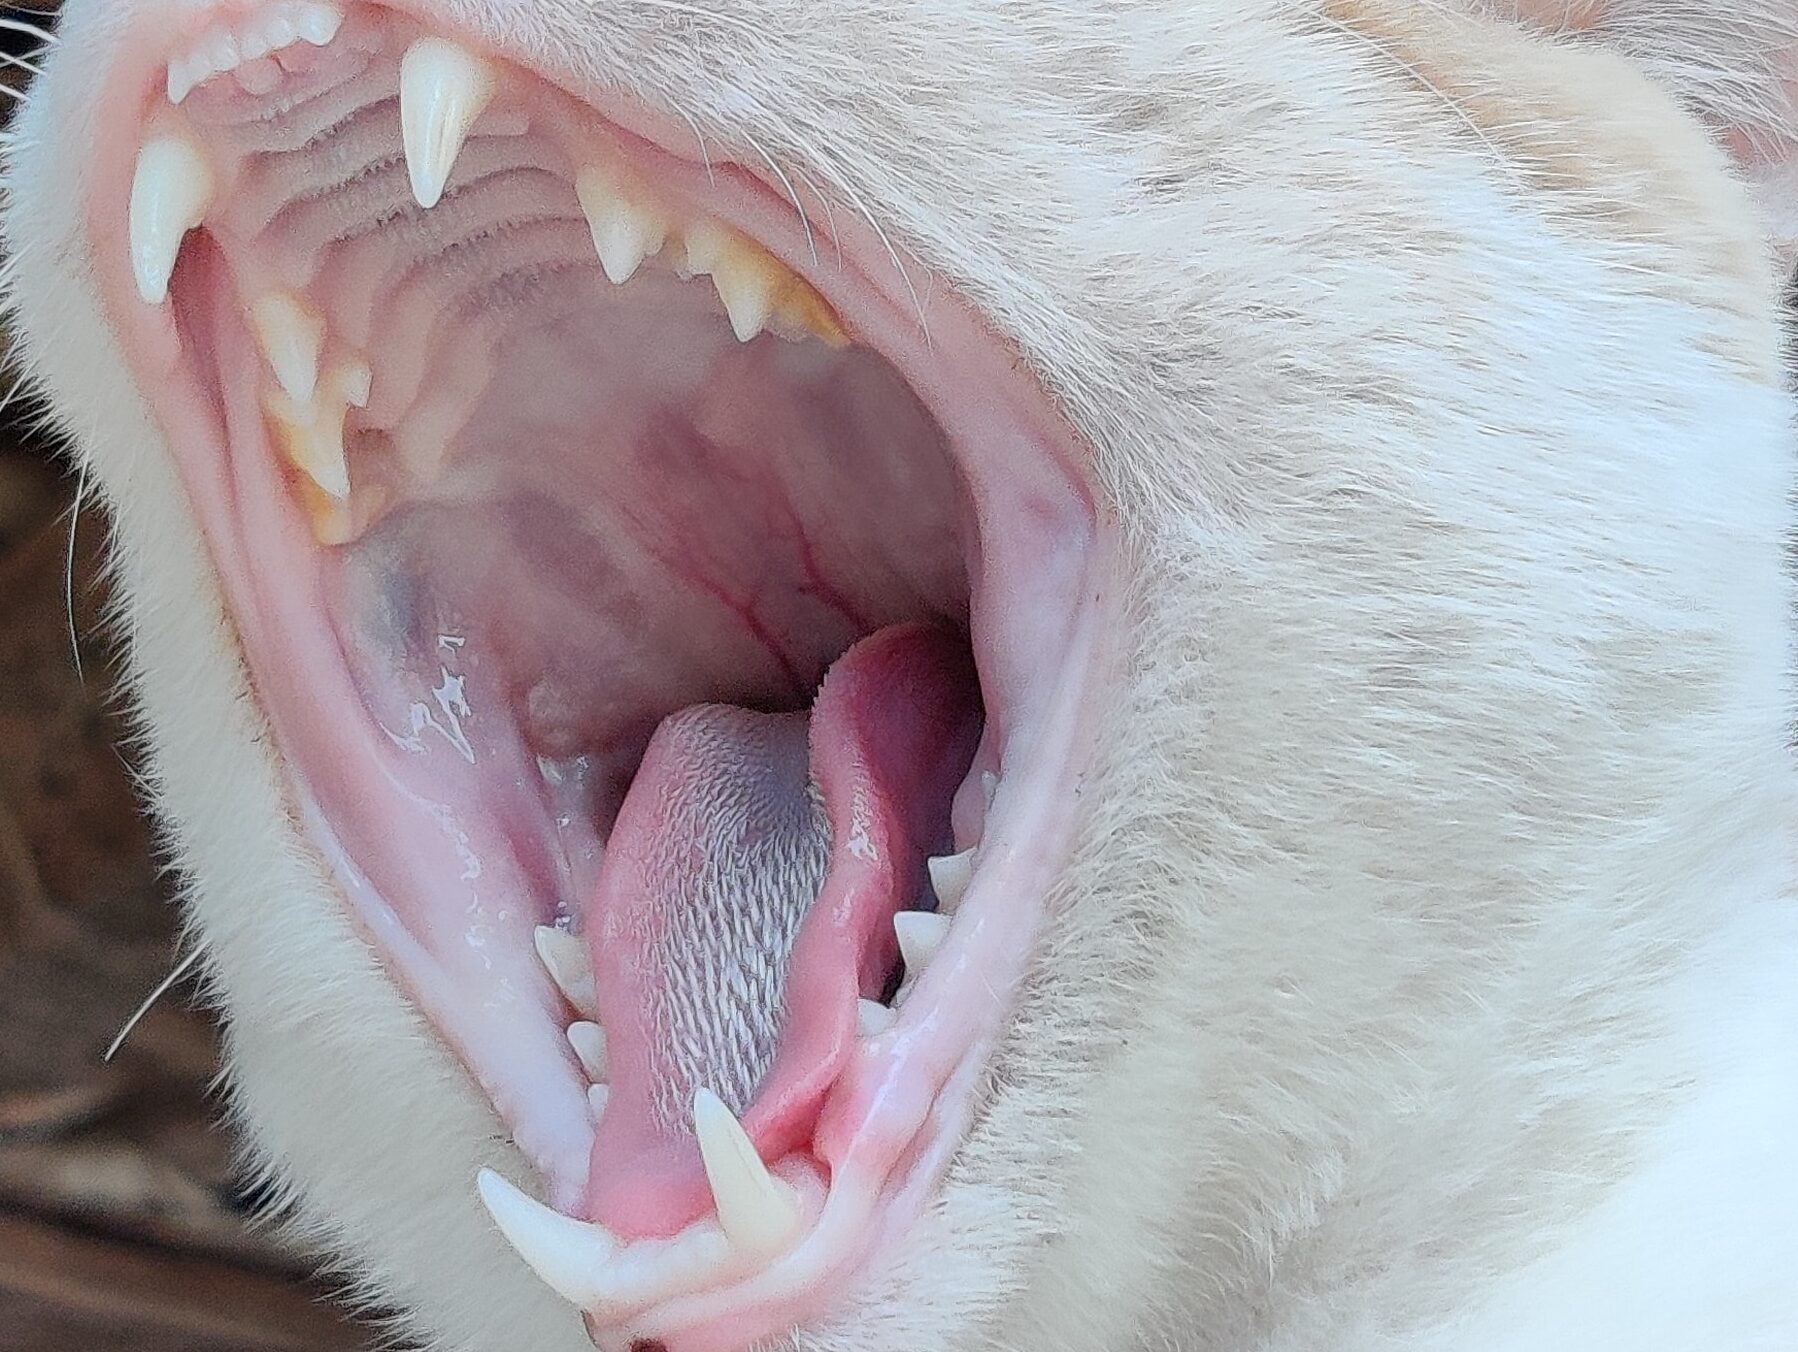 Cat yawn showing inside of mouth